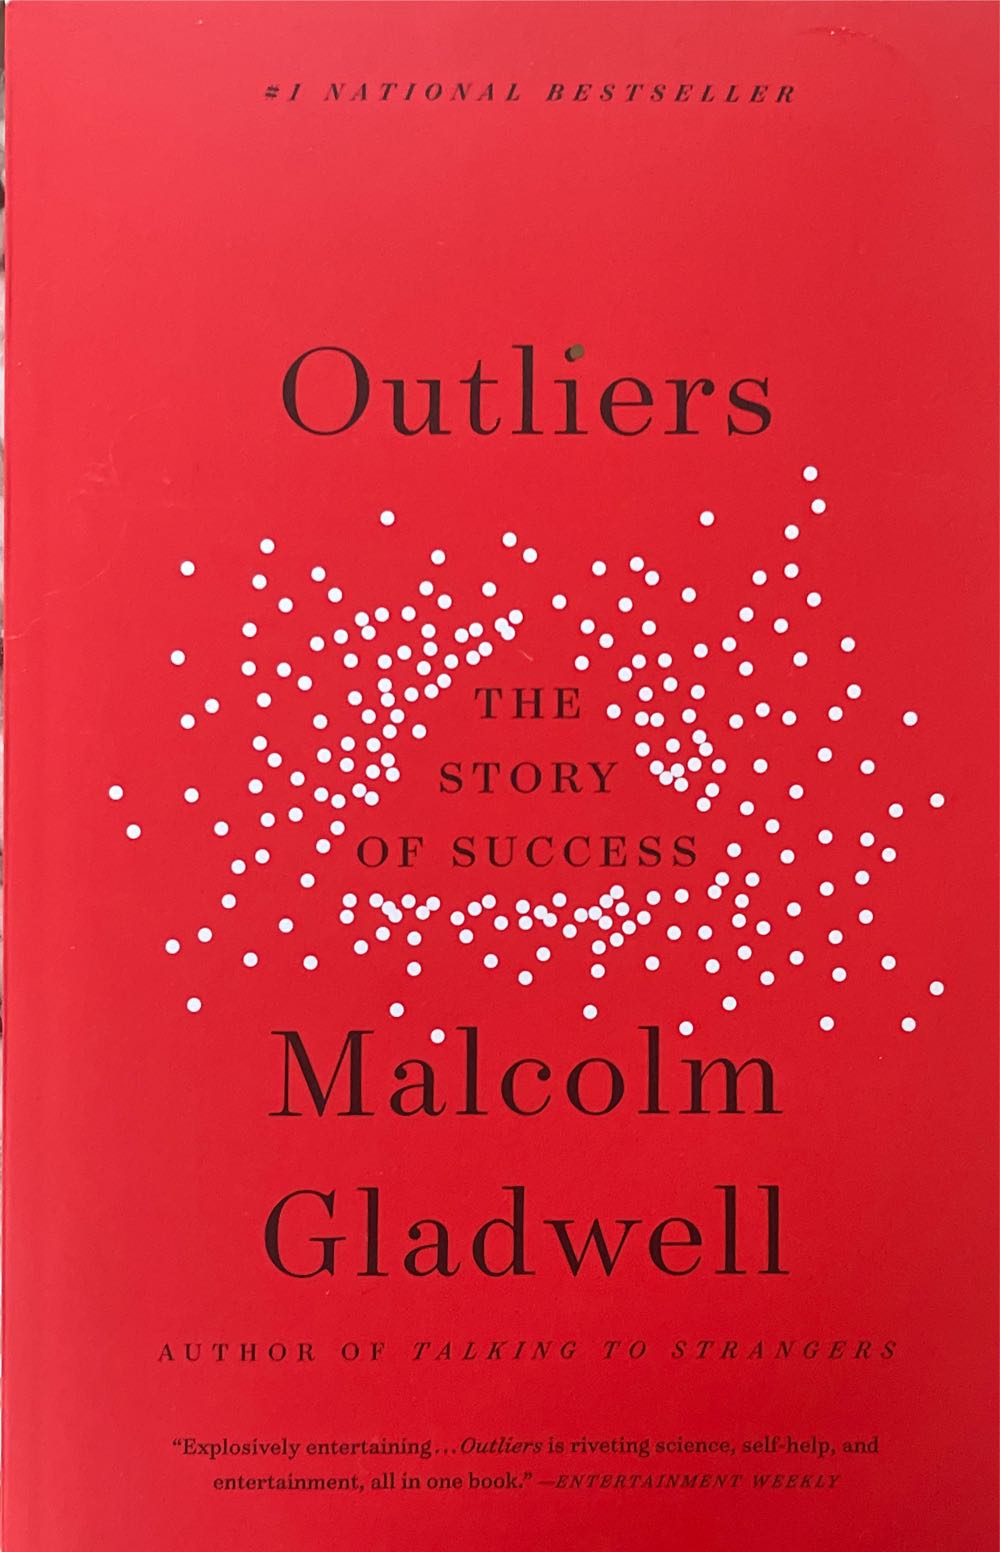 Outliers - Malcolm Gladwell (Back Bay Books - Paperback) book collectible [Barcode 9780316017930] - Main Image 3